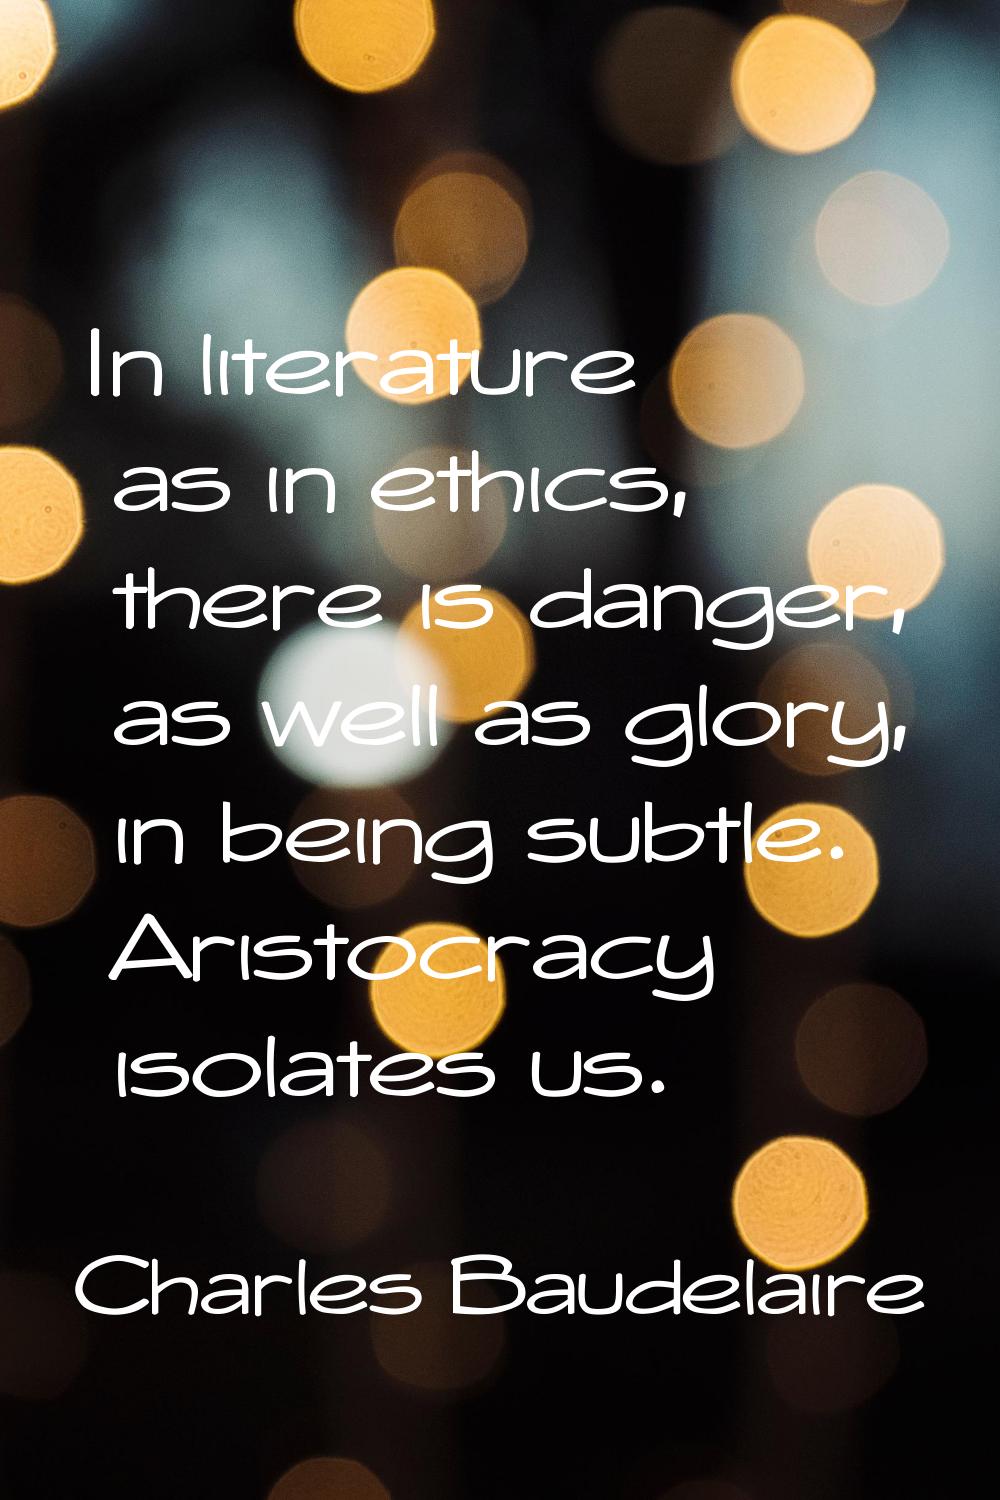 In literature as in ethics, there is danger, as well as glory, in being subtle. Aristocracy isolate